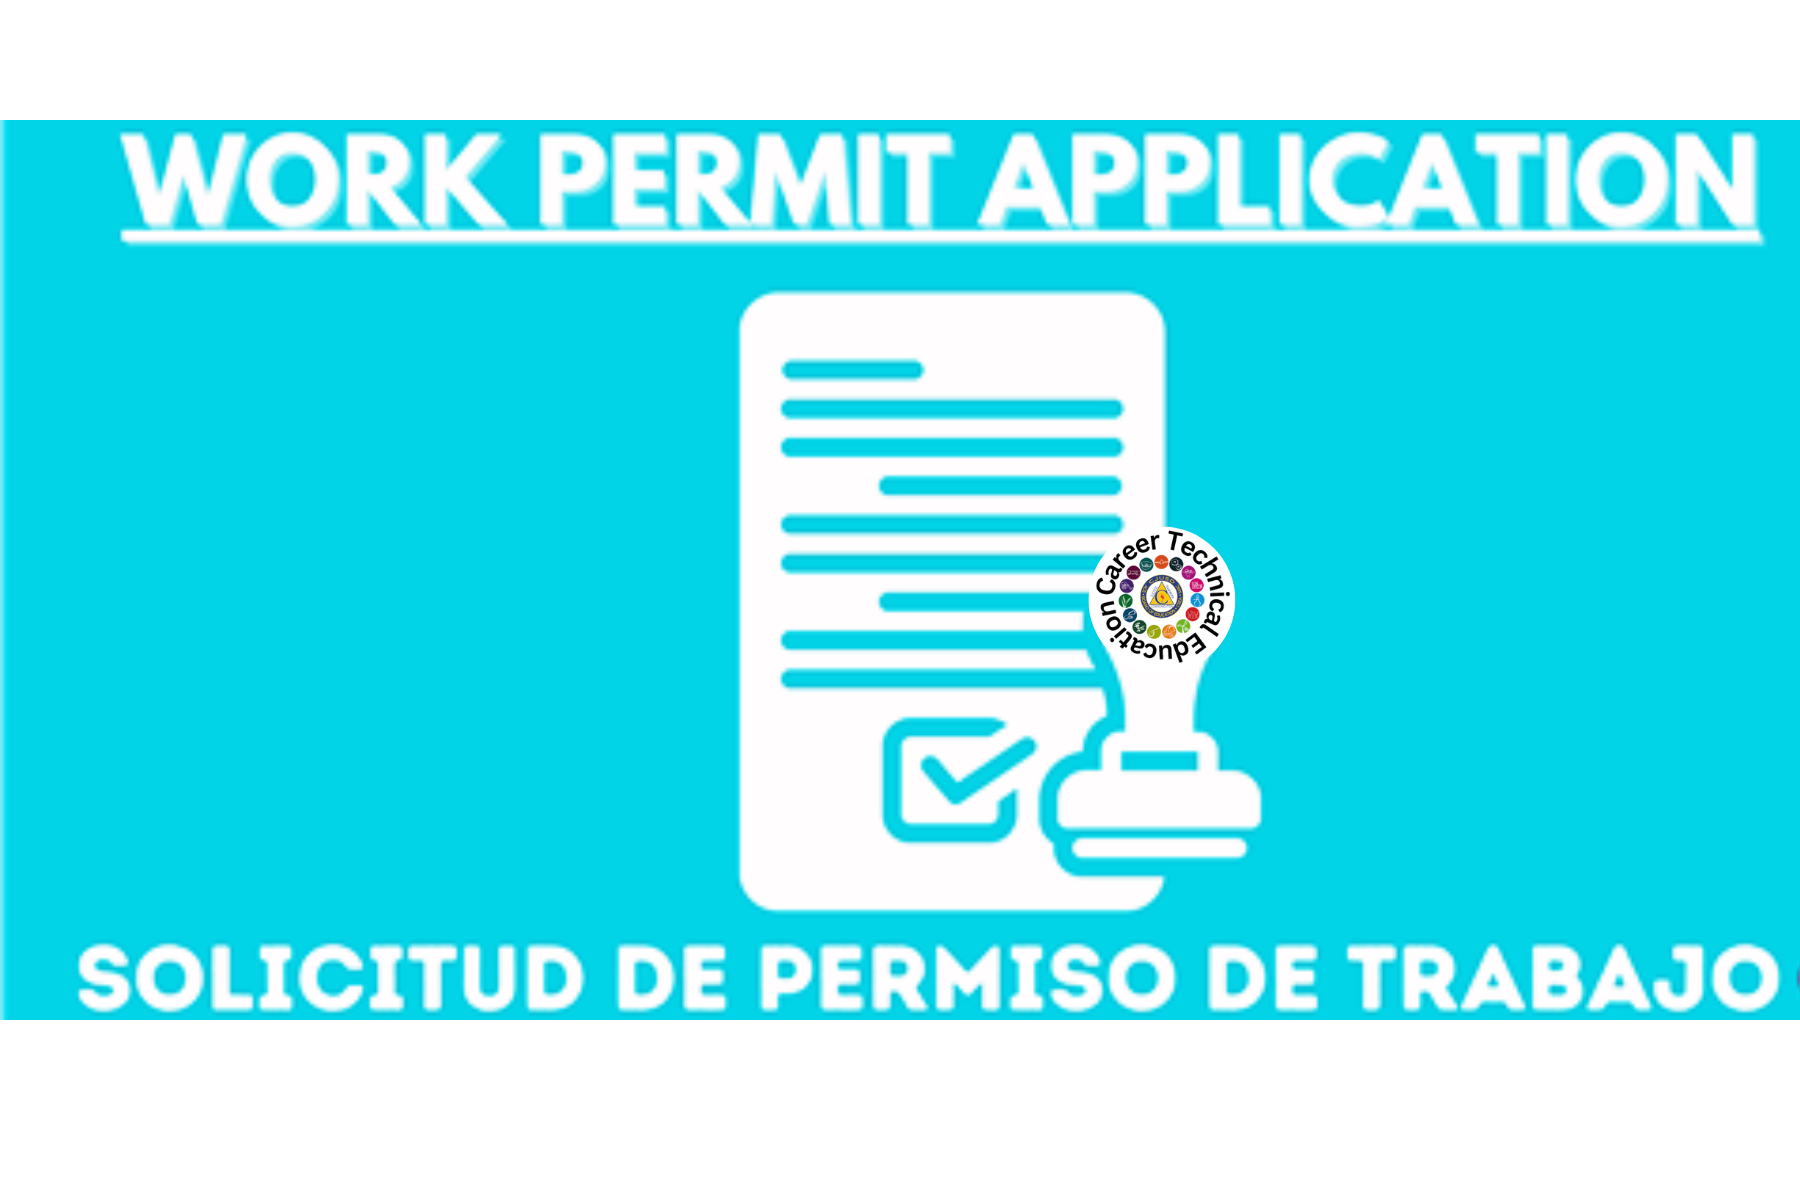 How to Request work permit 